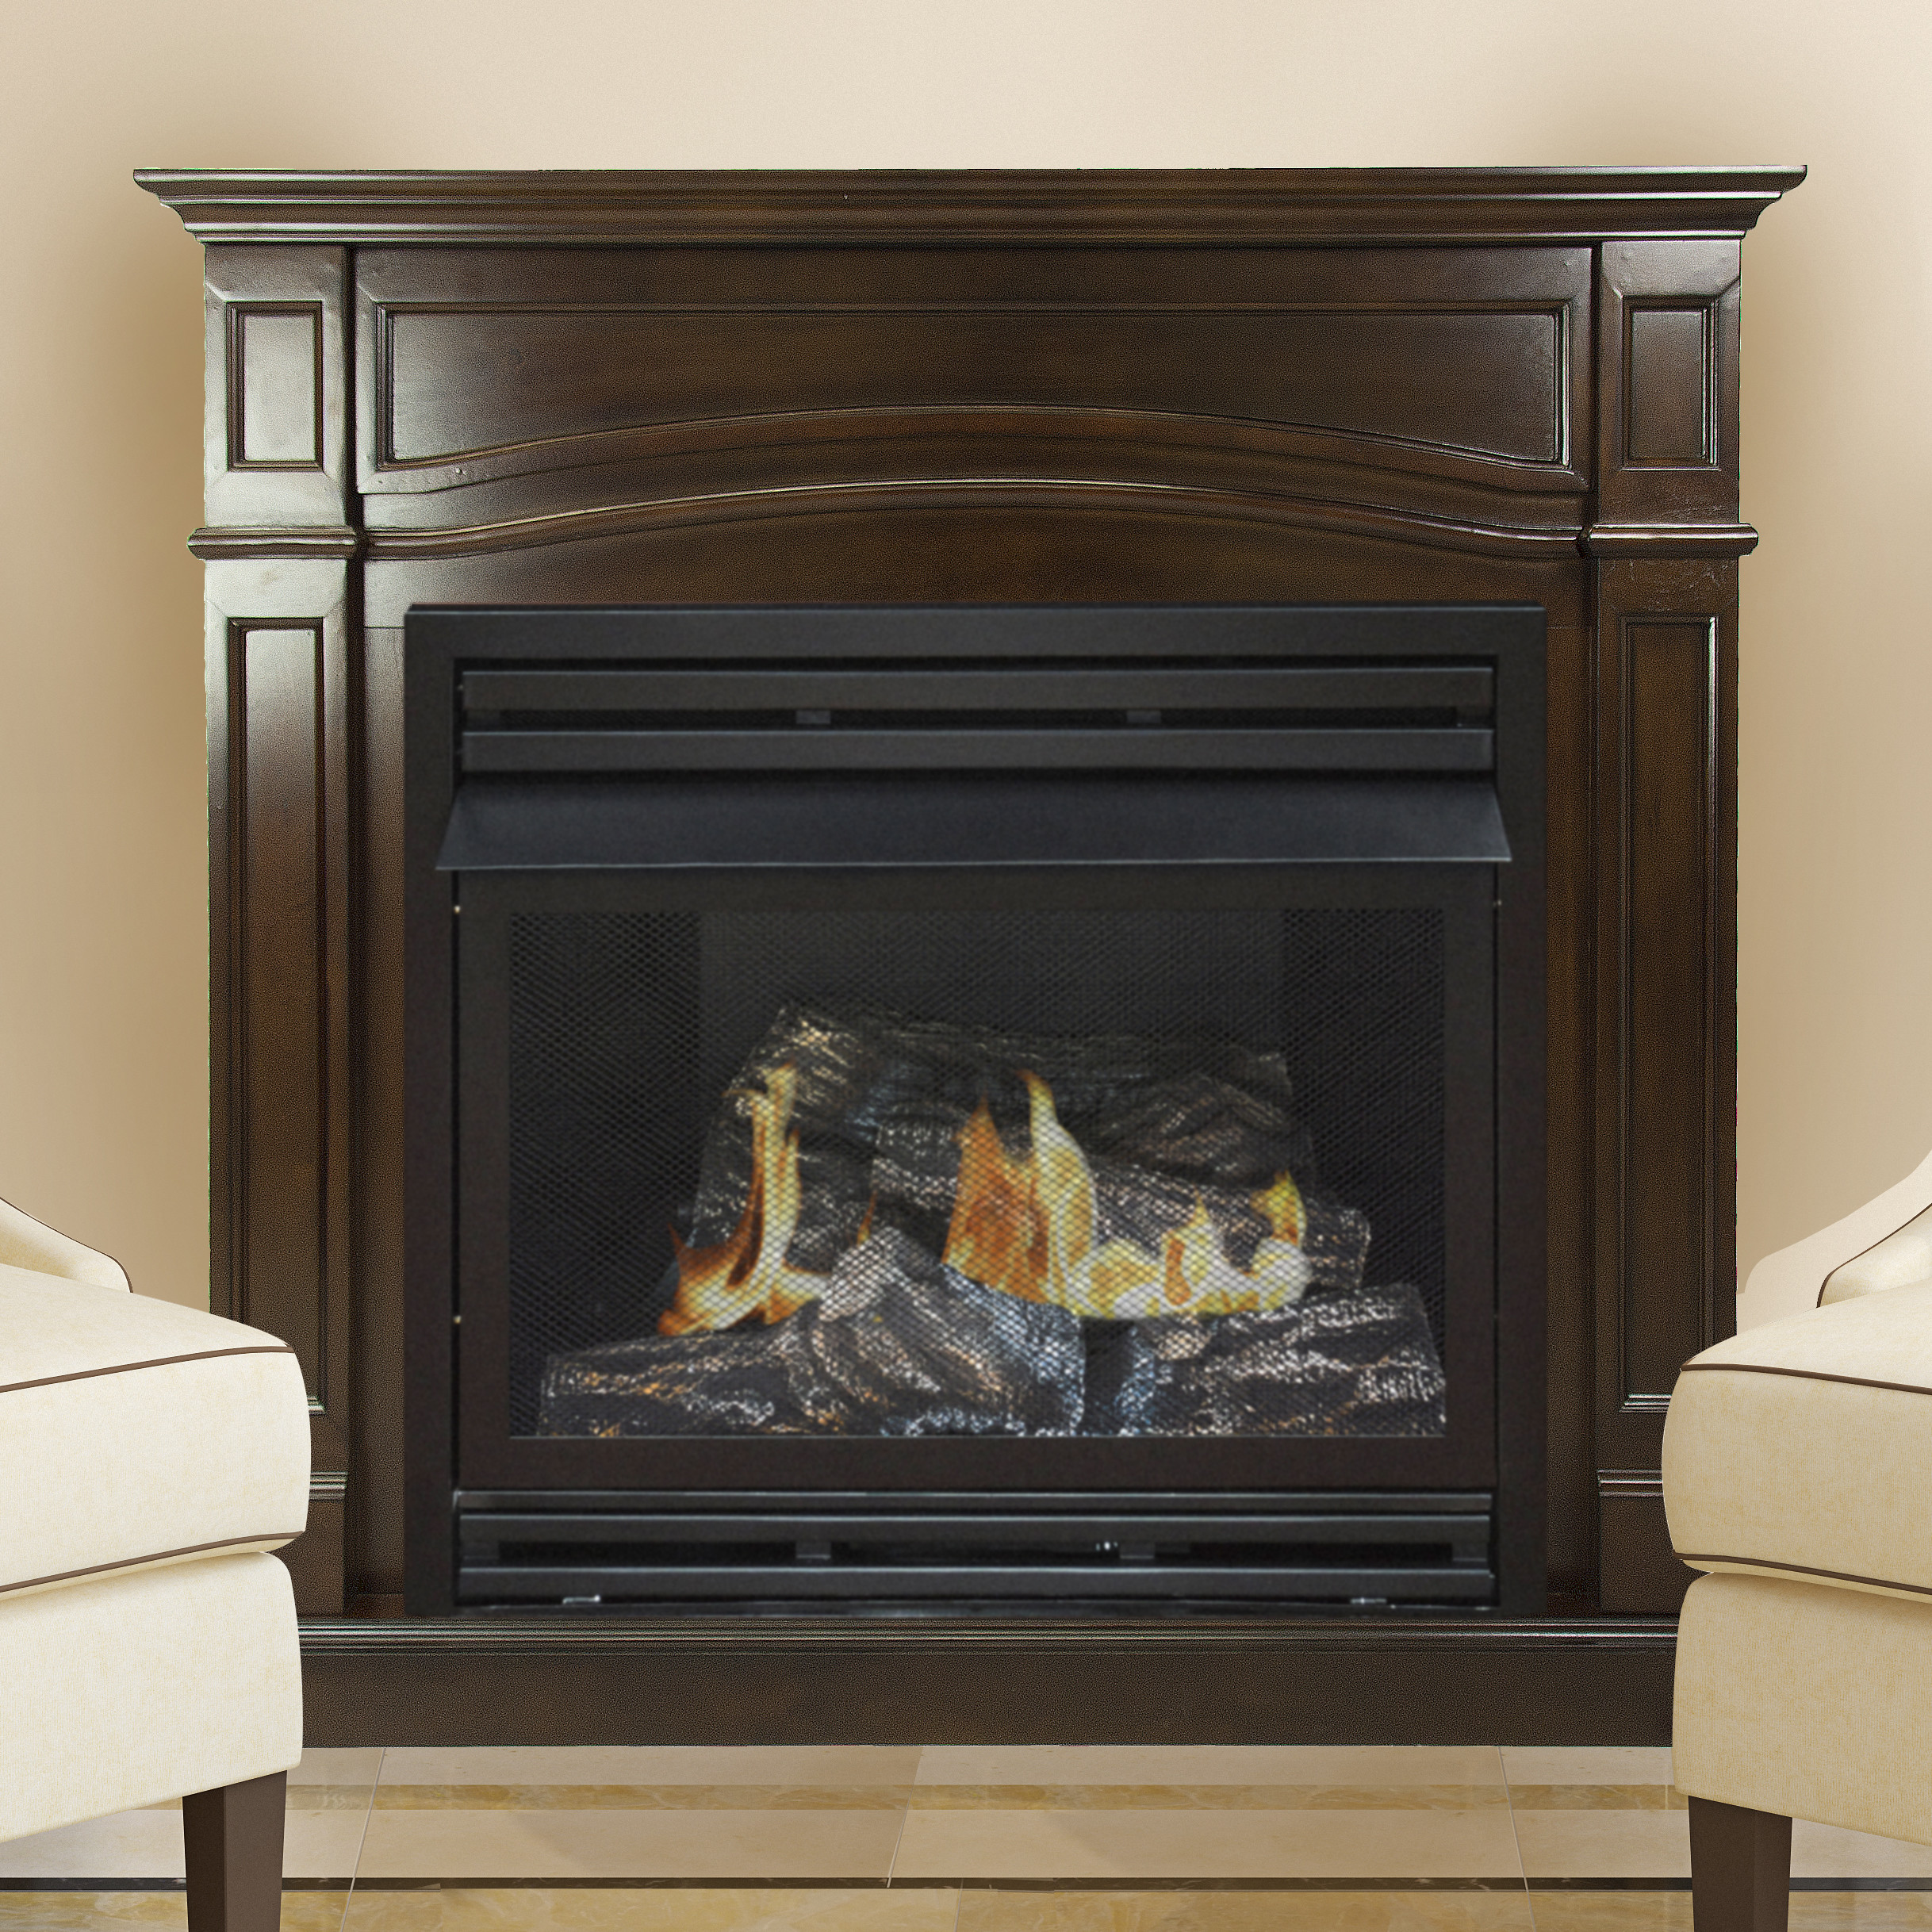 Pleasant Hearth 46 in. Liquid Propane Large Freestanding Cherry Vent Free Fireplace 32,000 BTU - image 2 of 8